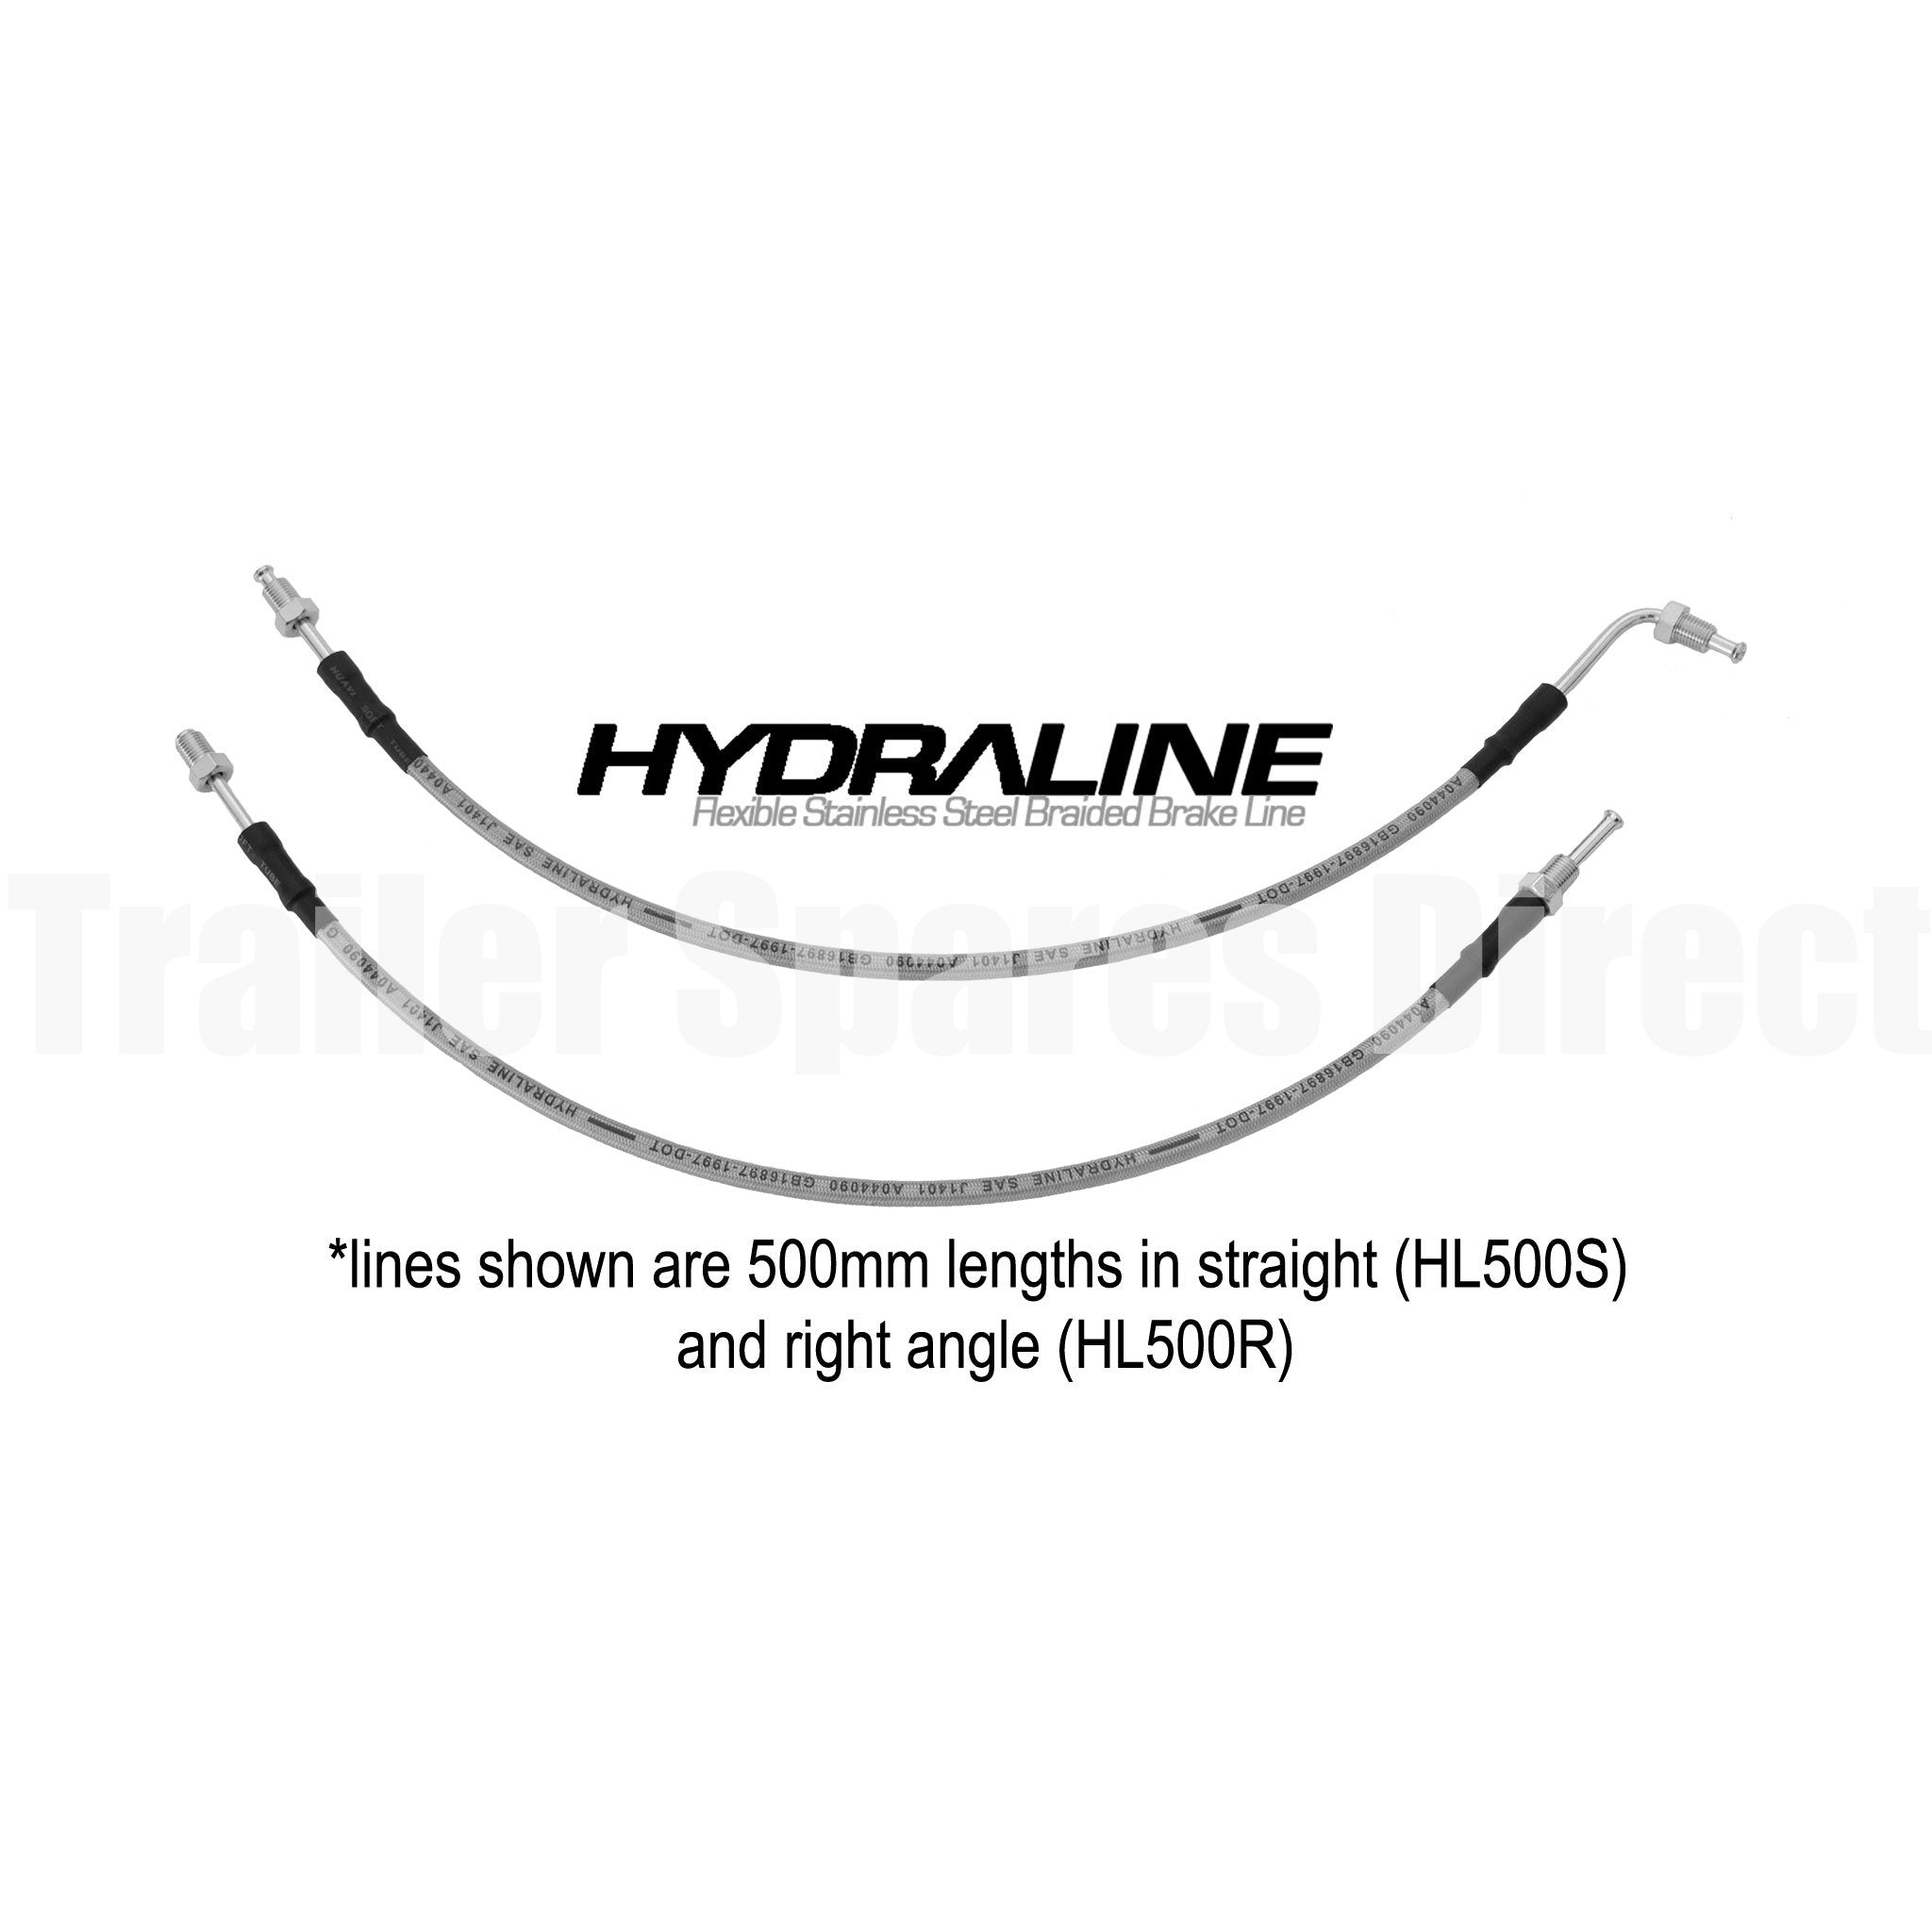 Single axle HydraLine kit with 3500mm lead line